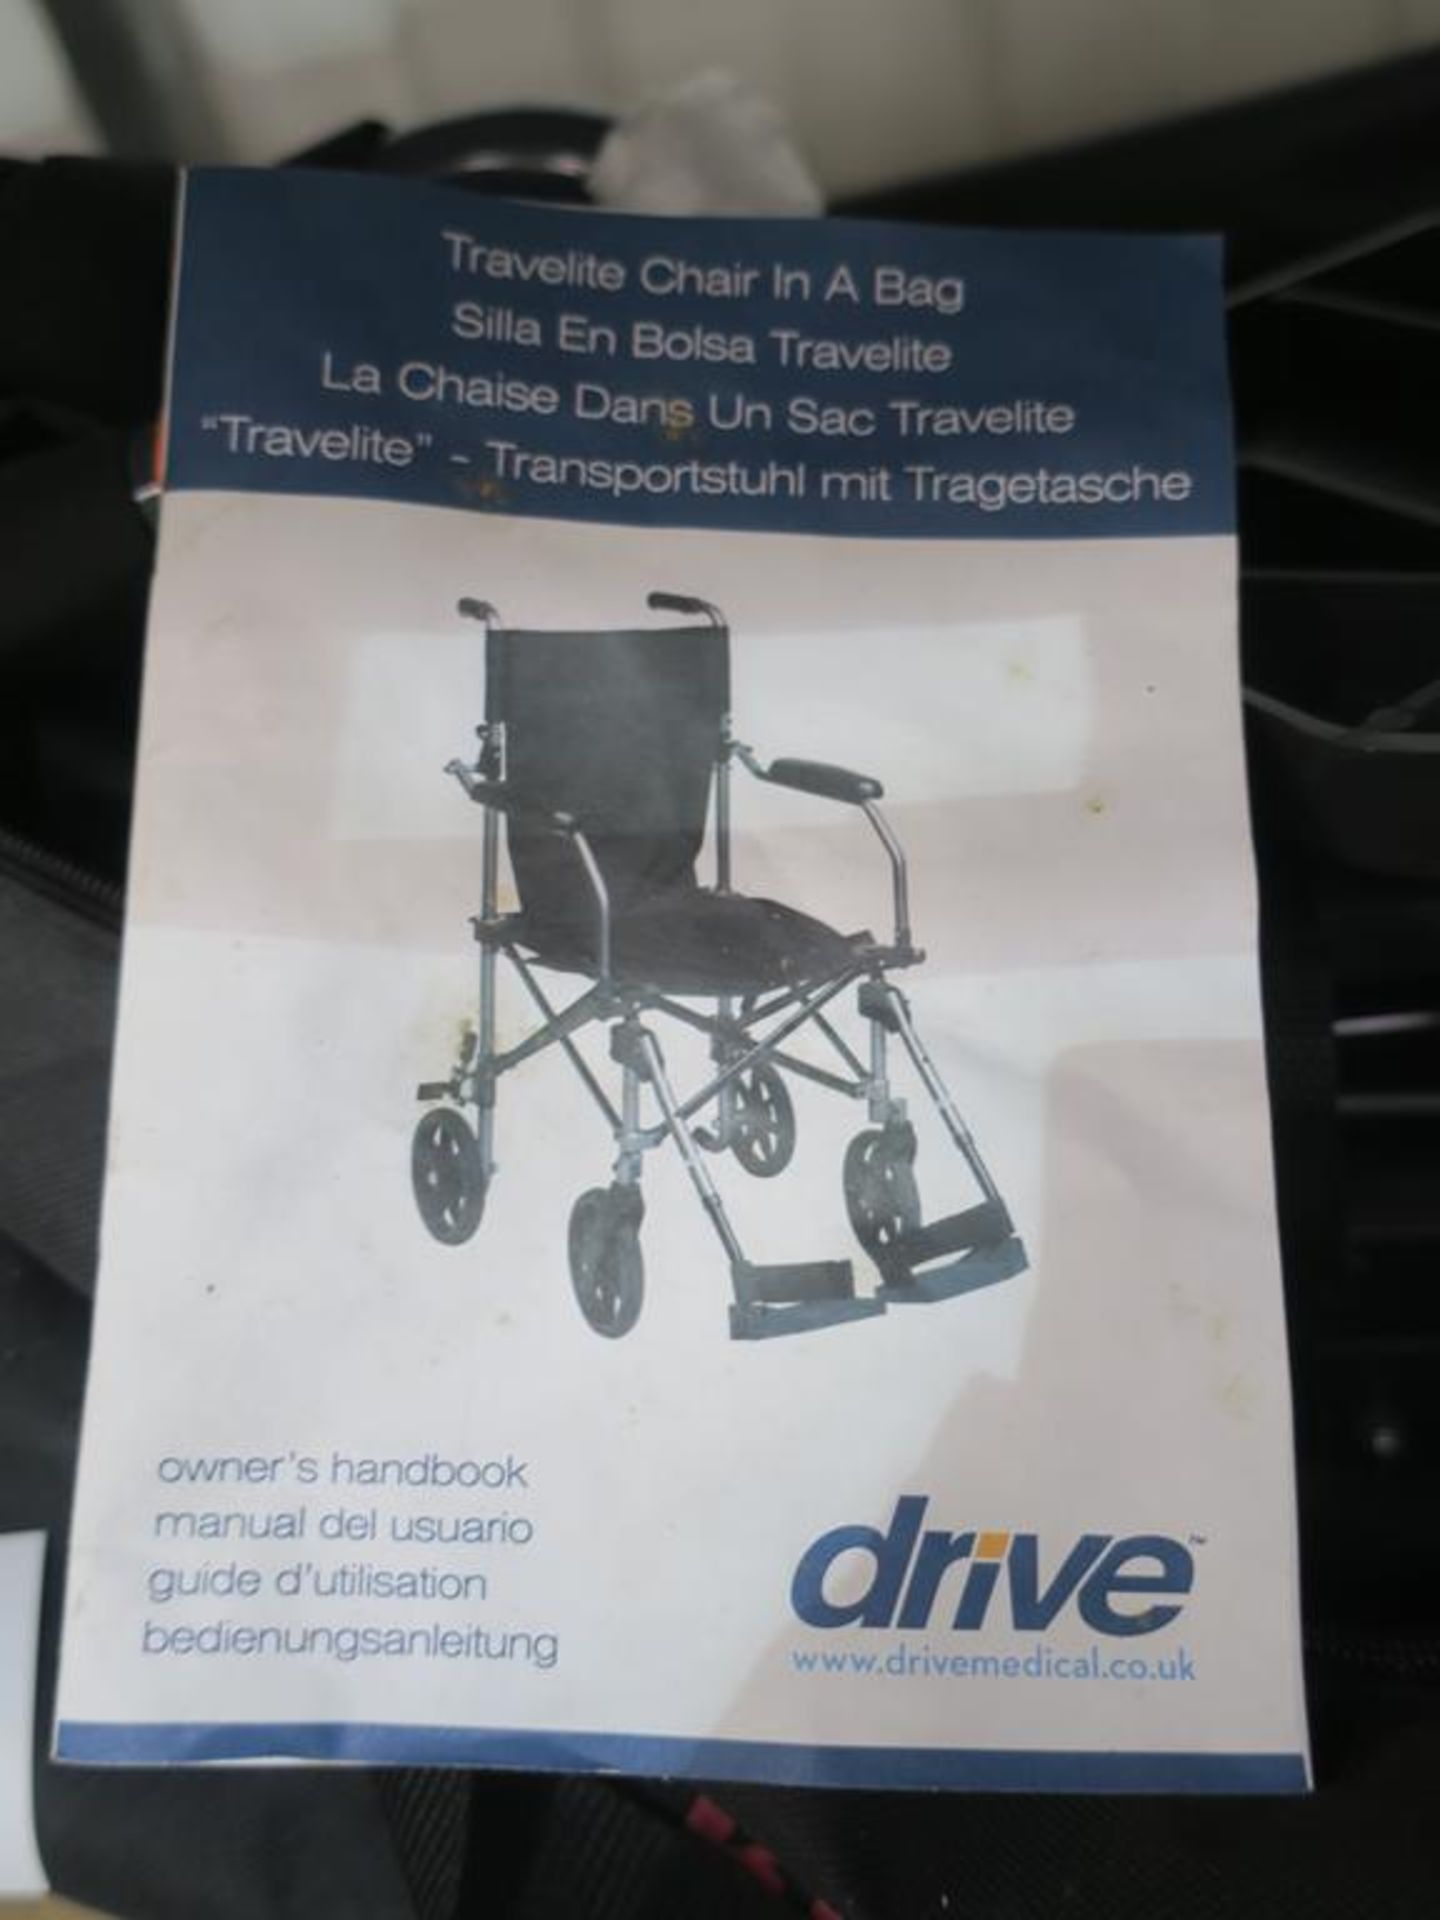 A Drive-Medical Travelite Chair in a Bag - Image 2 of 3